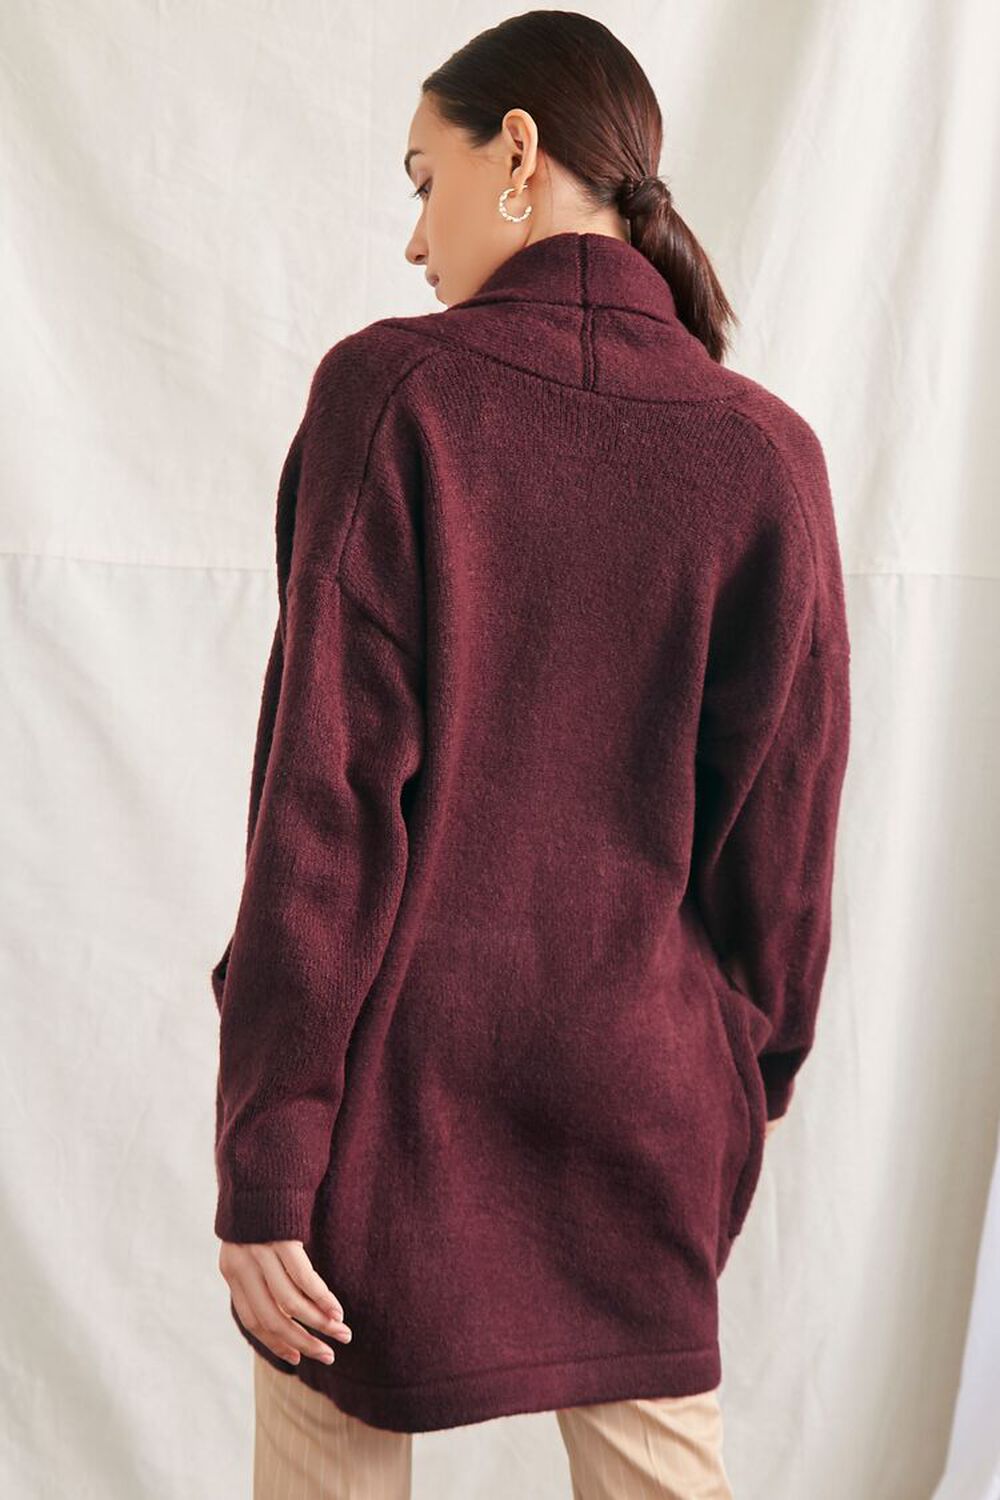 BURGUNDY Open-Front Cardigan Sweater, image 3